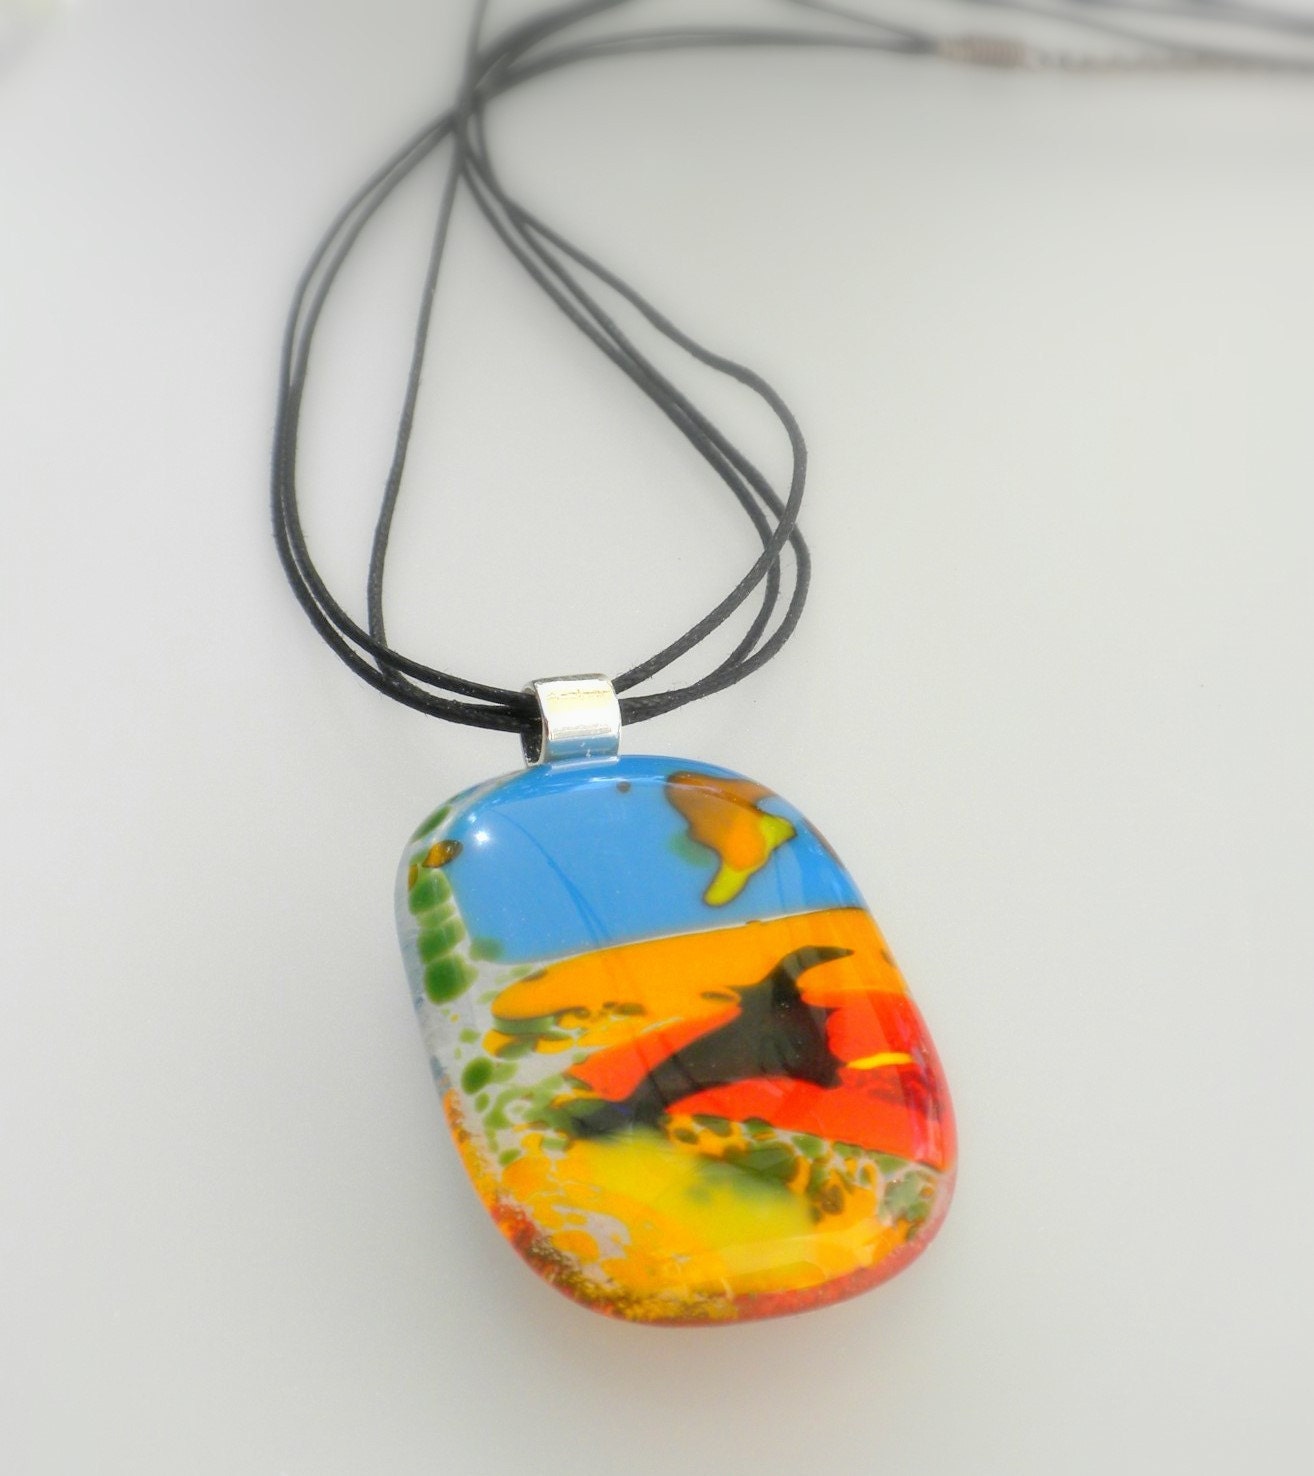 At The Lake - handmade modern fused glass necklace